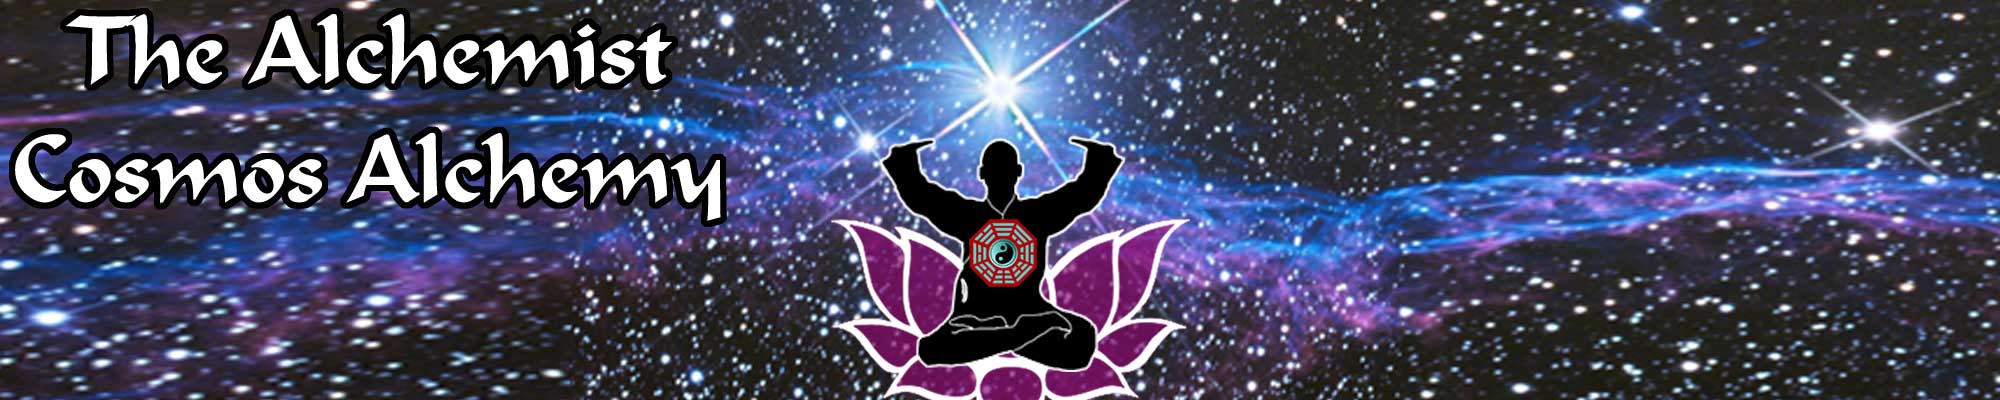 Buddha playing Alchemy in the Cosmos - Online LIVE QiGong Energy Meditations for Health Wellness Consciousness Expansion